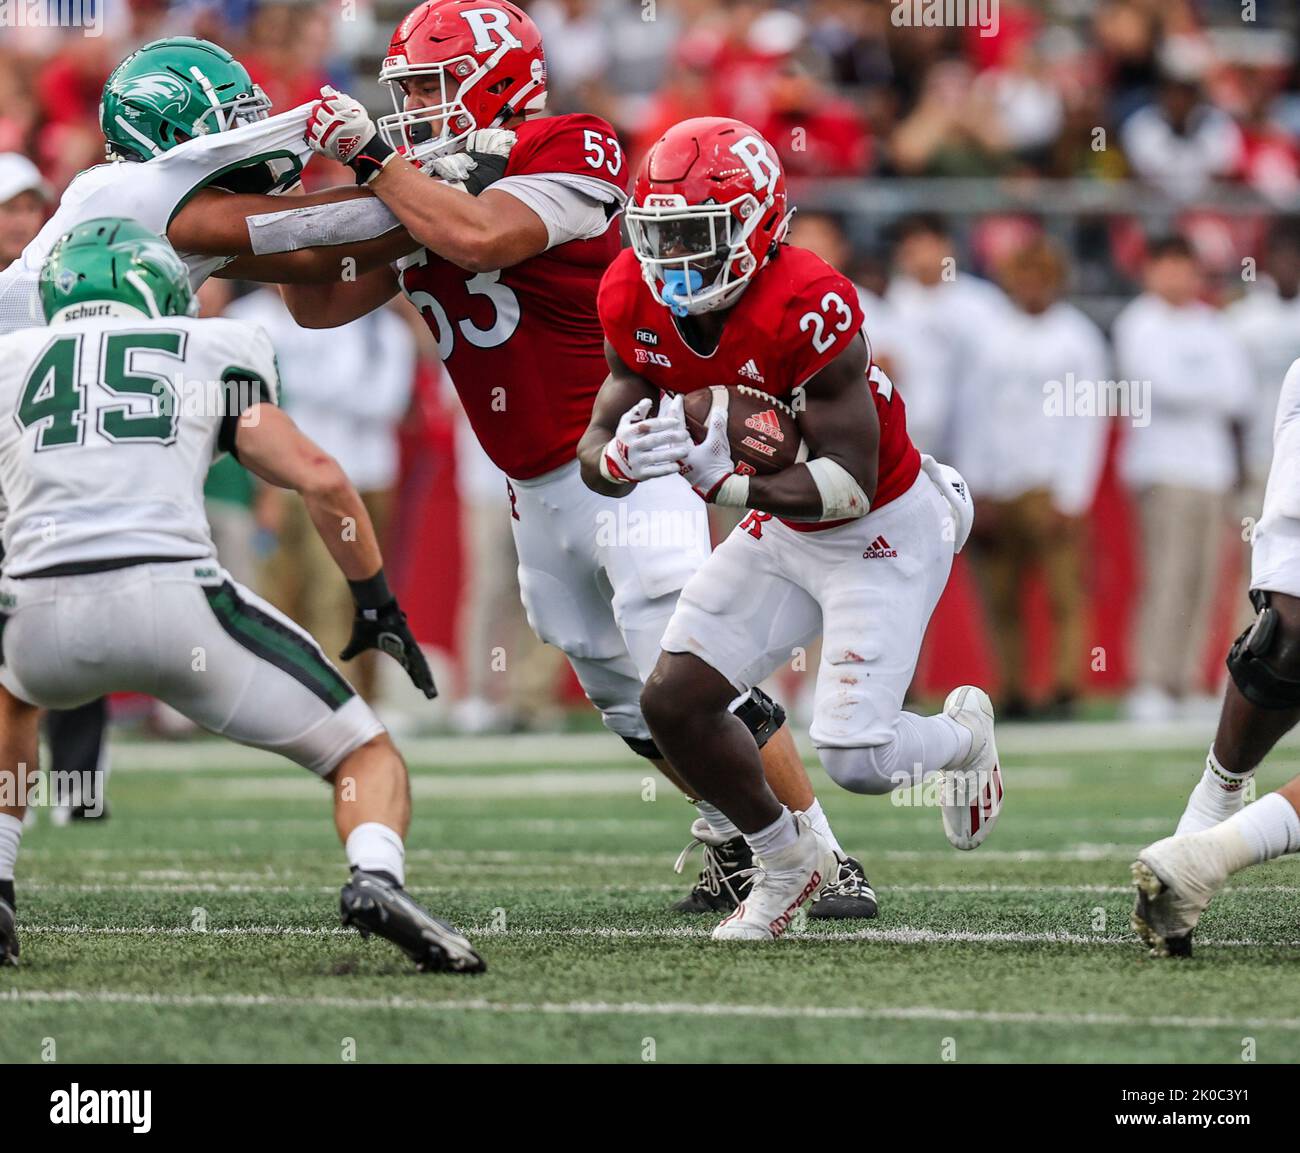 Piscataway, NJ, USA. 10th Sep, 2022. Rutgers Scarlet Knights running back Kyle Monangai (23) finds a gap to run through during a NCAA football game between the Wagner Seahawks and the Rutgers Scarlet Knights at SHI Stadium in Piscataway, NJ. Mike Langish/Cal Sport Media. Credit: csm/Alamy Live News Credit: Cal Sport Media/Alamy Live News Stock Photo